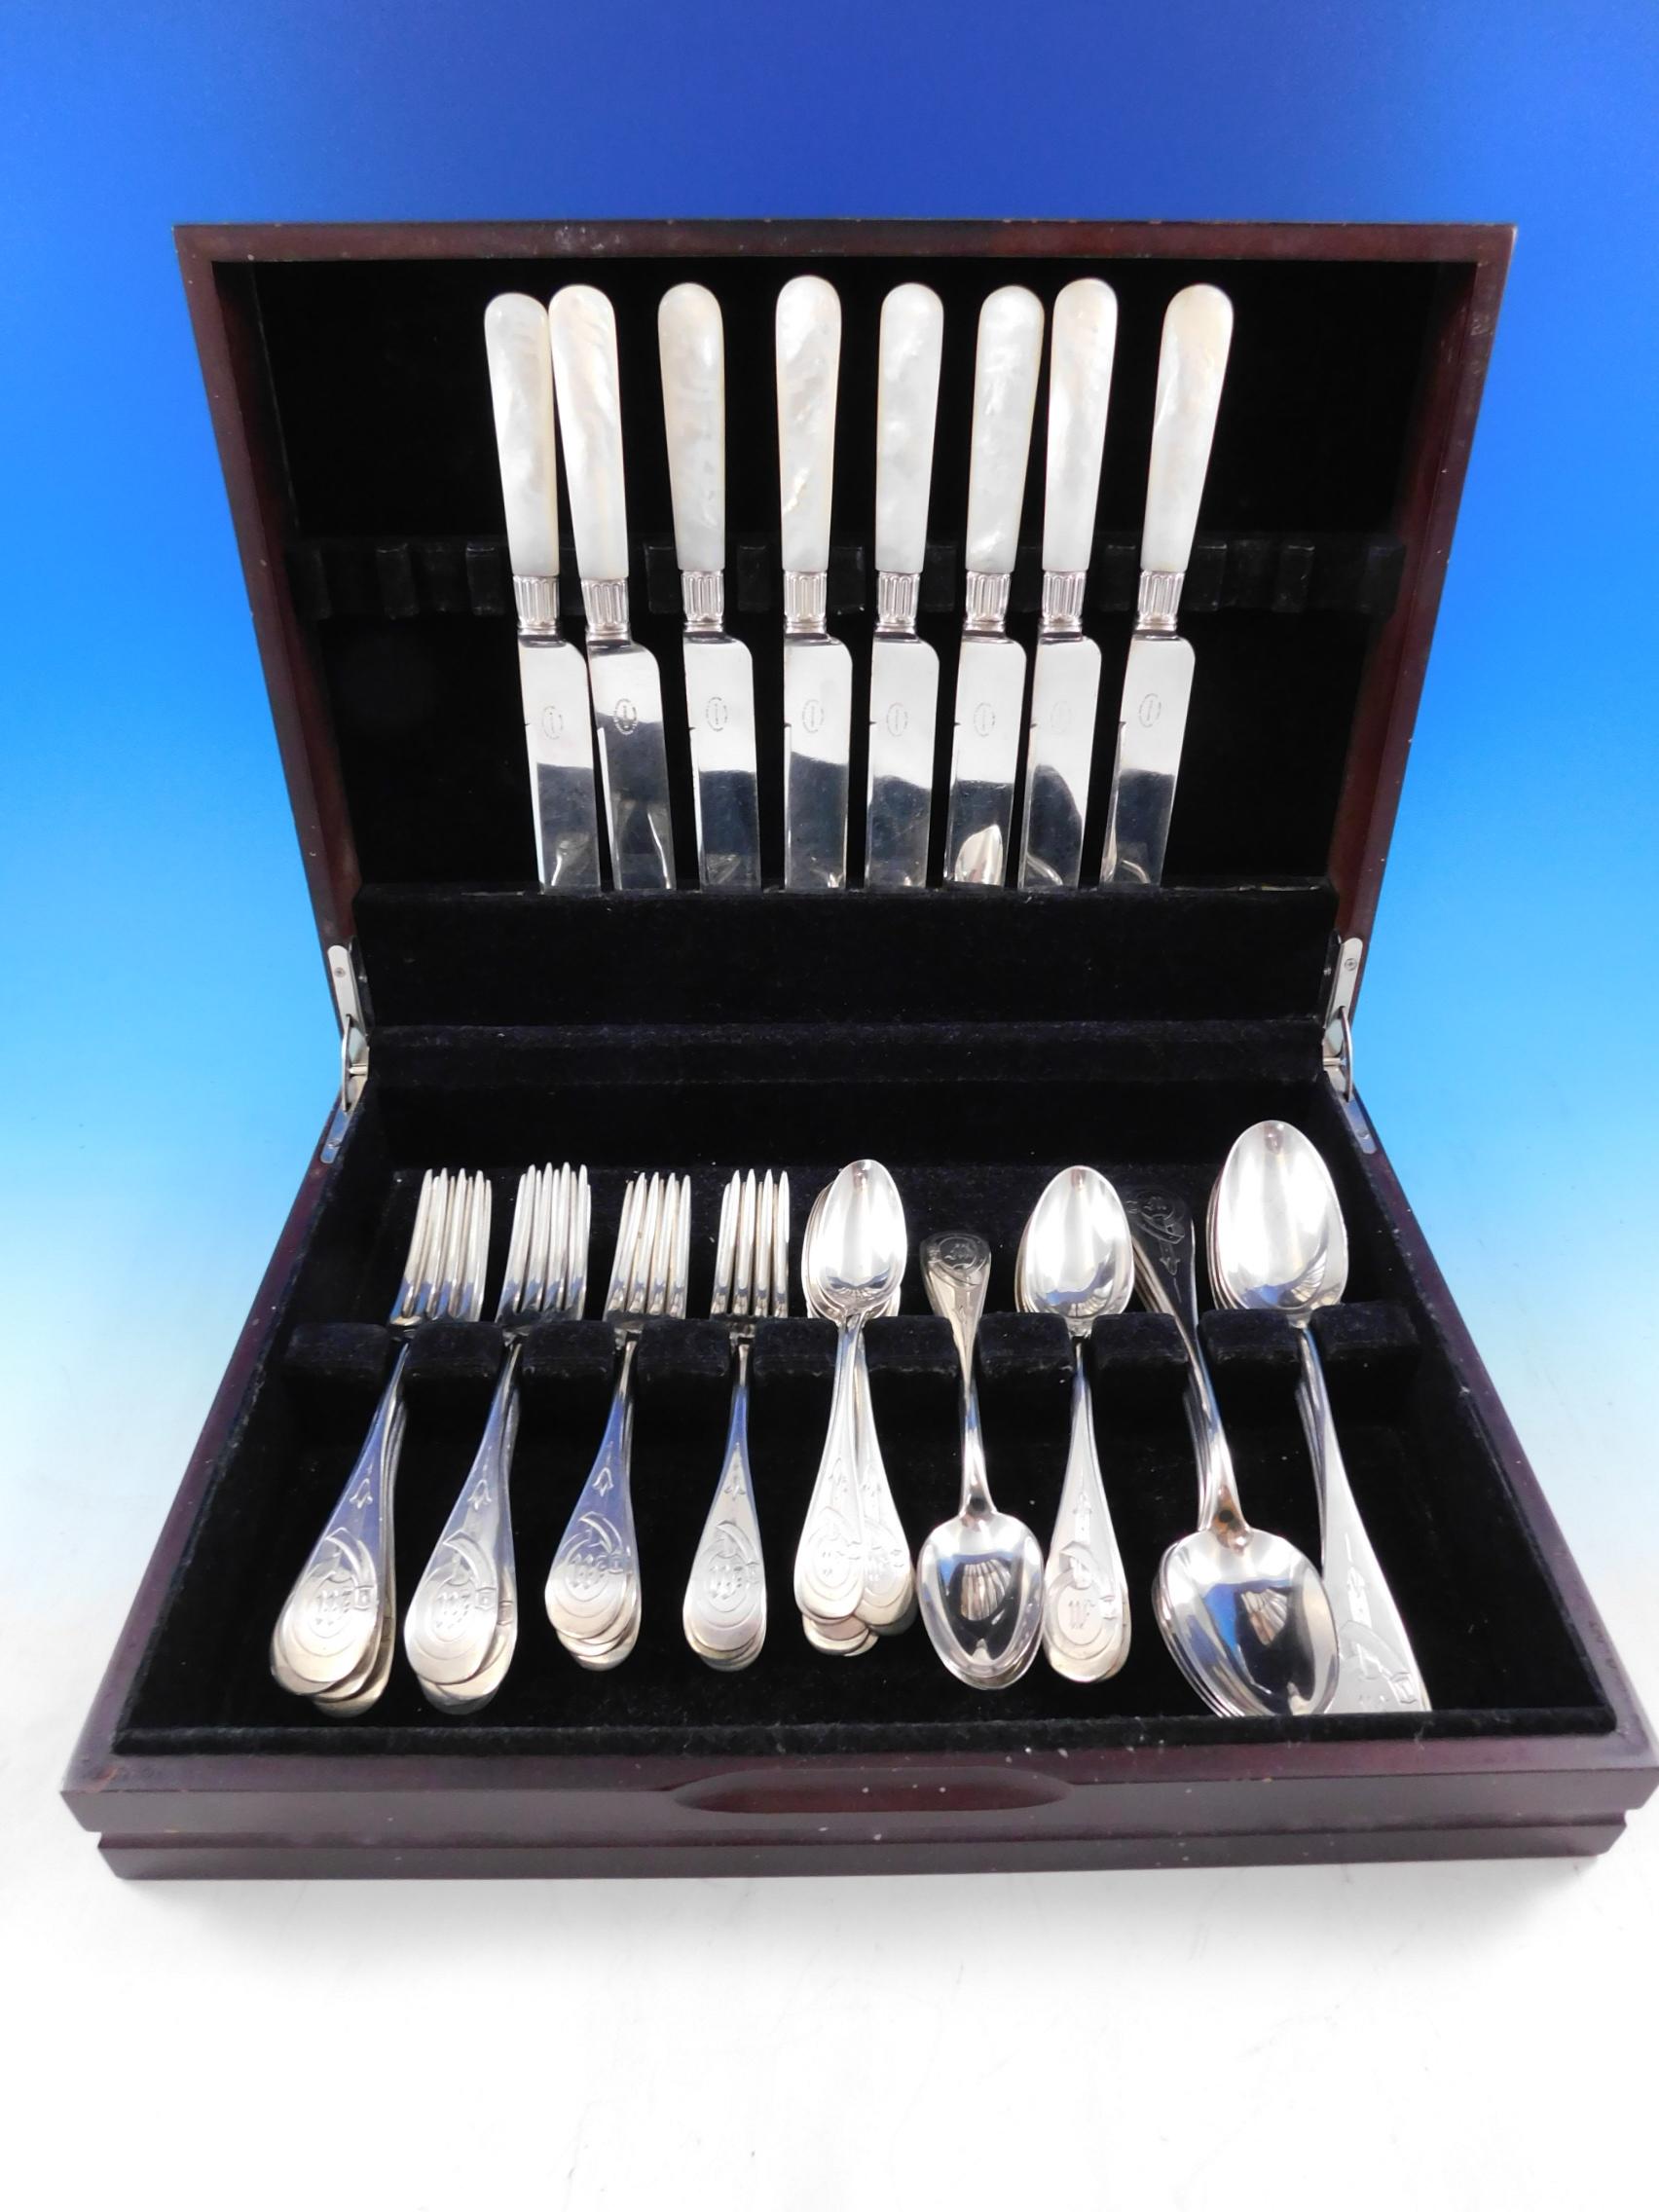 Equestrian motif silver flatware set - 48 pieces. This early service includes:

8 knives, mother of pearl handles with sterling ferrules and plated blunt blades, 8 5/8